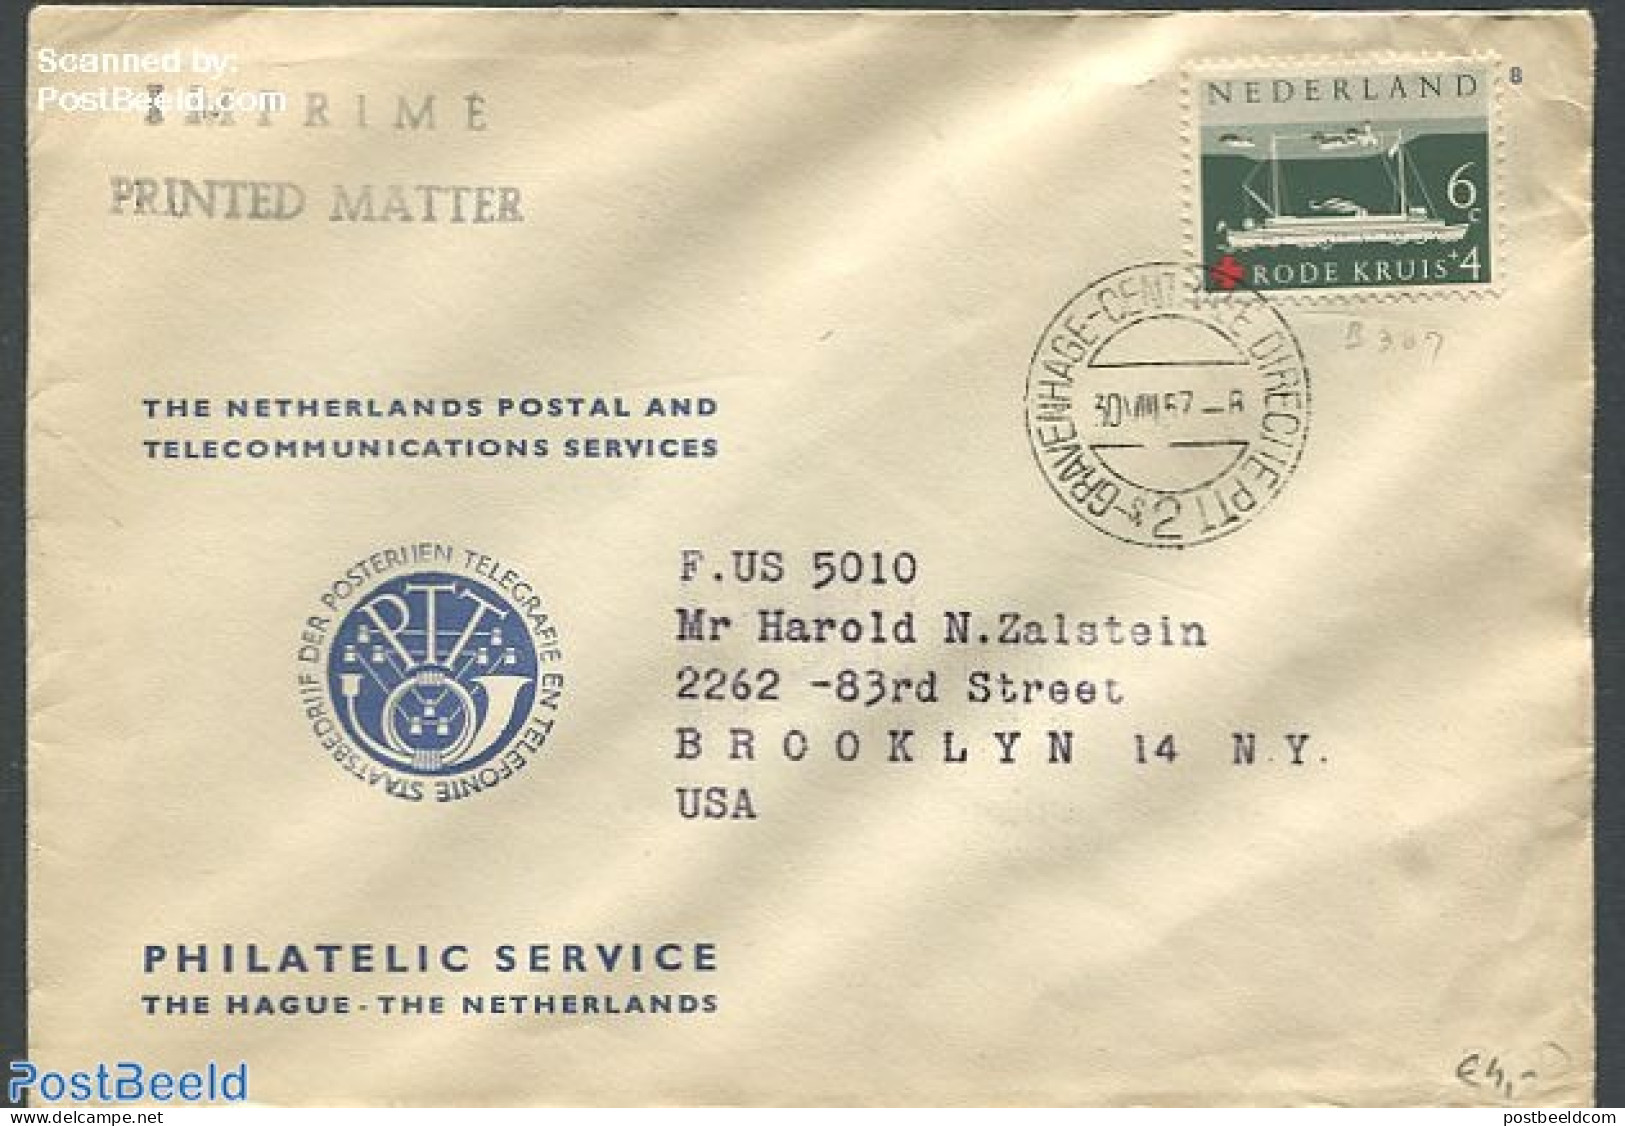 Netherlands 1957 Cover To Brooklyn USA With Nvhp No.696, Postal History - Covers & Documents